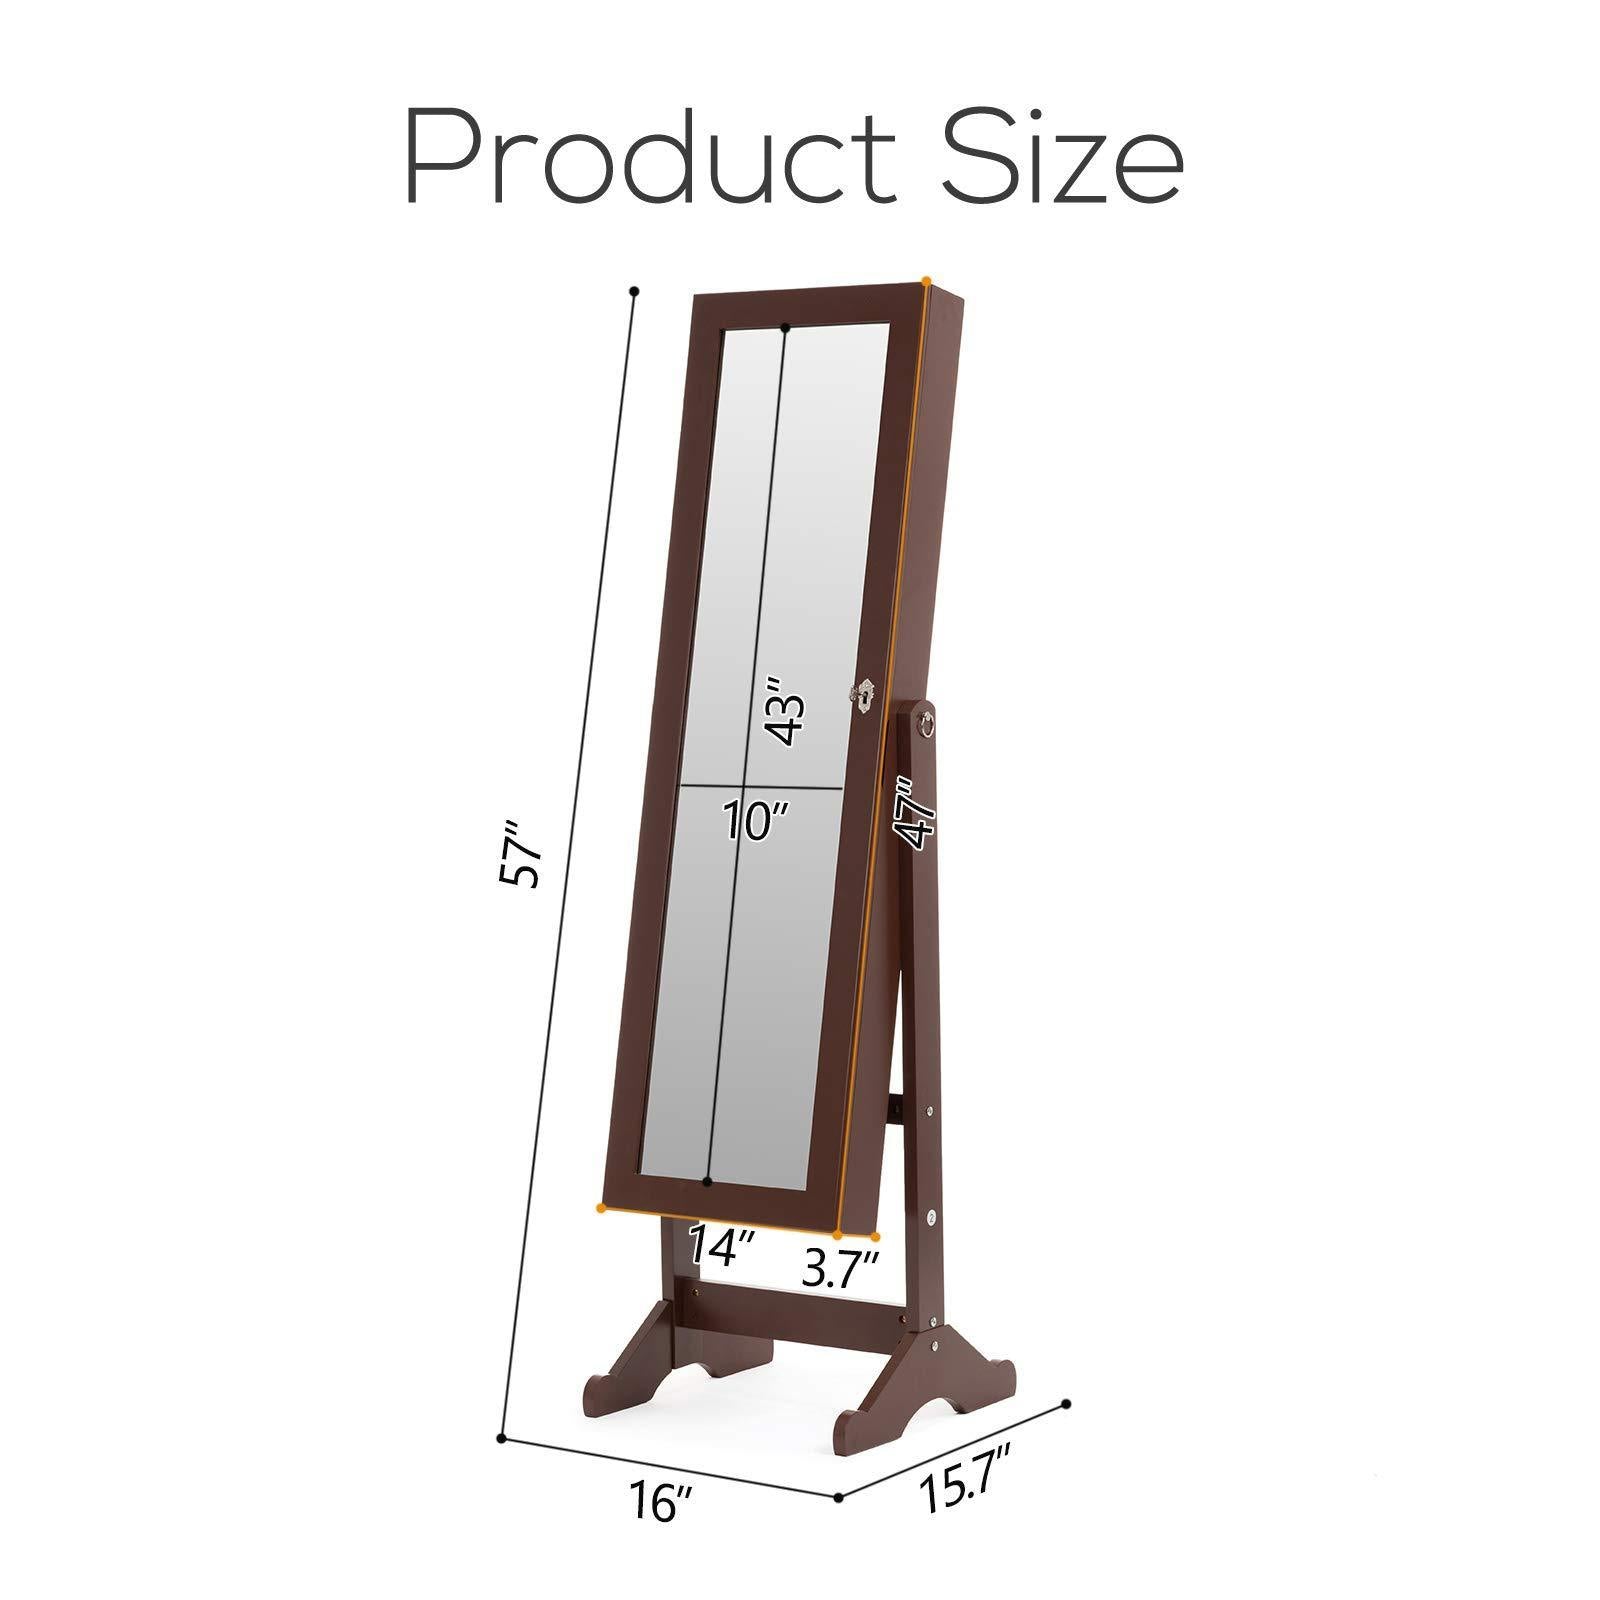 Top rated mecor jewelry armoire led standing mirrored jewelry cabinet organizer storage lockable full length mirror makeup box w 2 drawers 5 shelves 3 adjustable angle brown